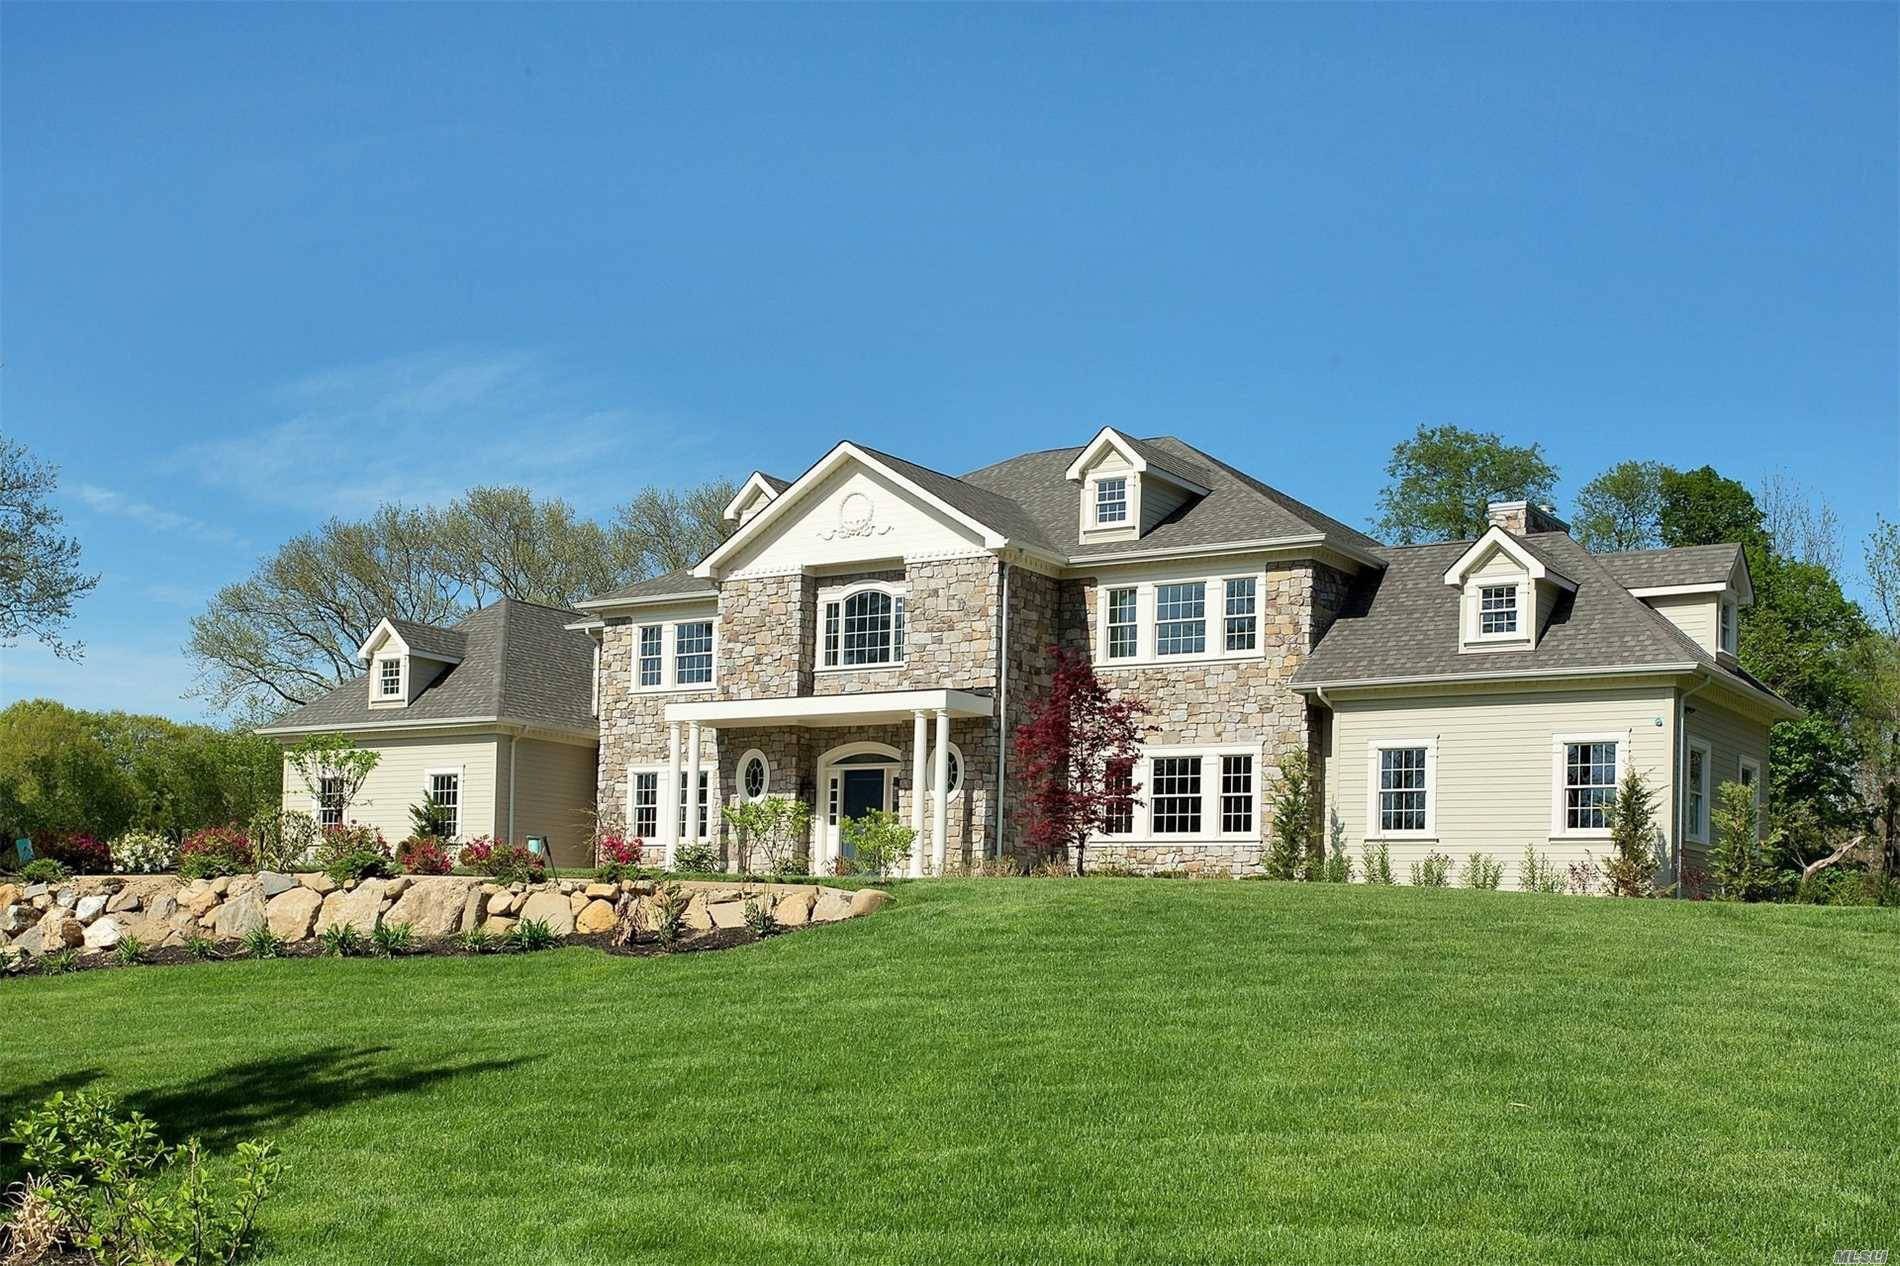 Unparalleled new construction with the epitome of design elegance in the 7400 sq ft colonial majestically set in a cul de sac location.